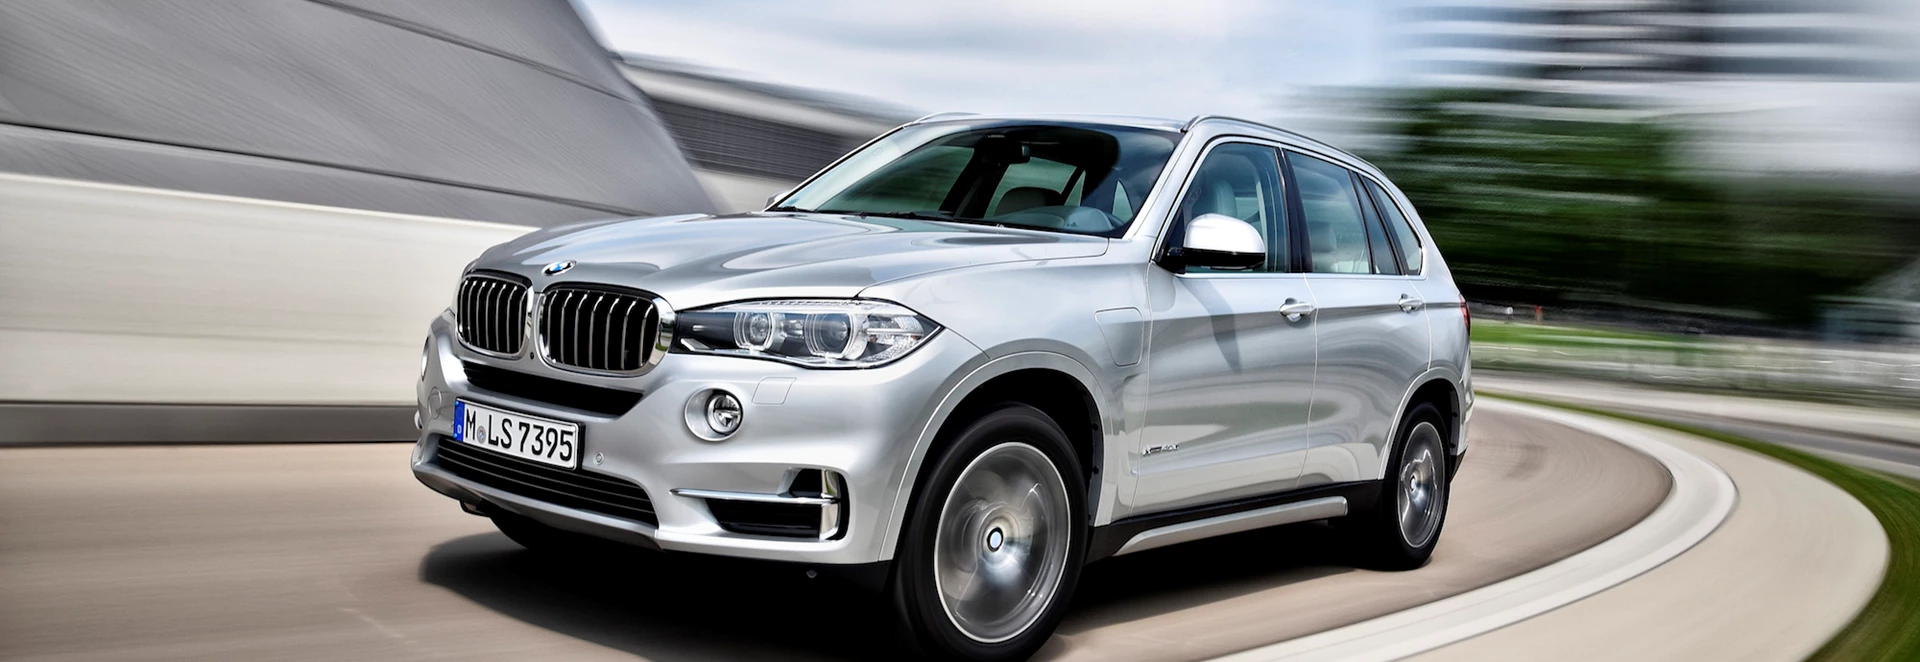 2018 BMW X5 iPerformance review